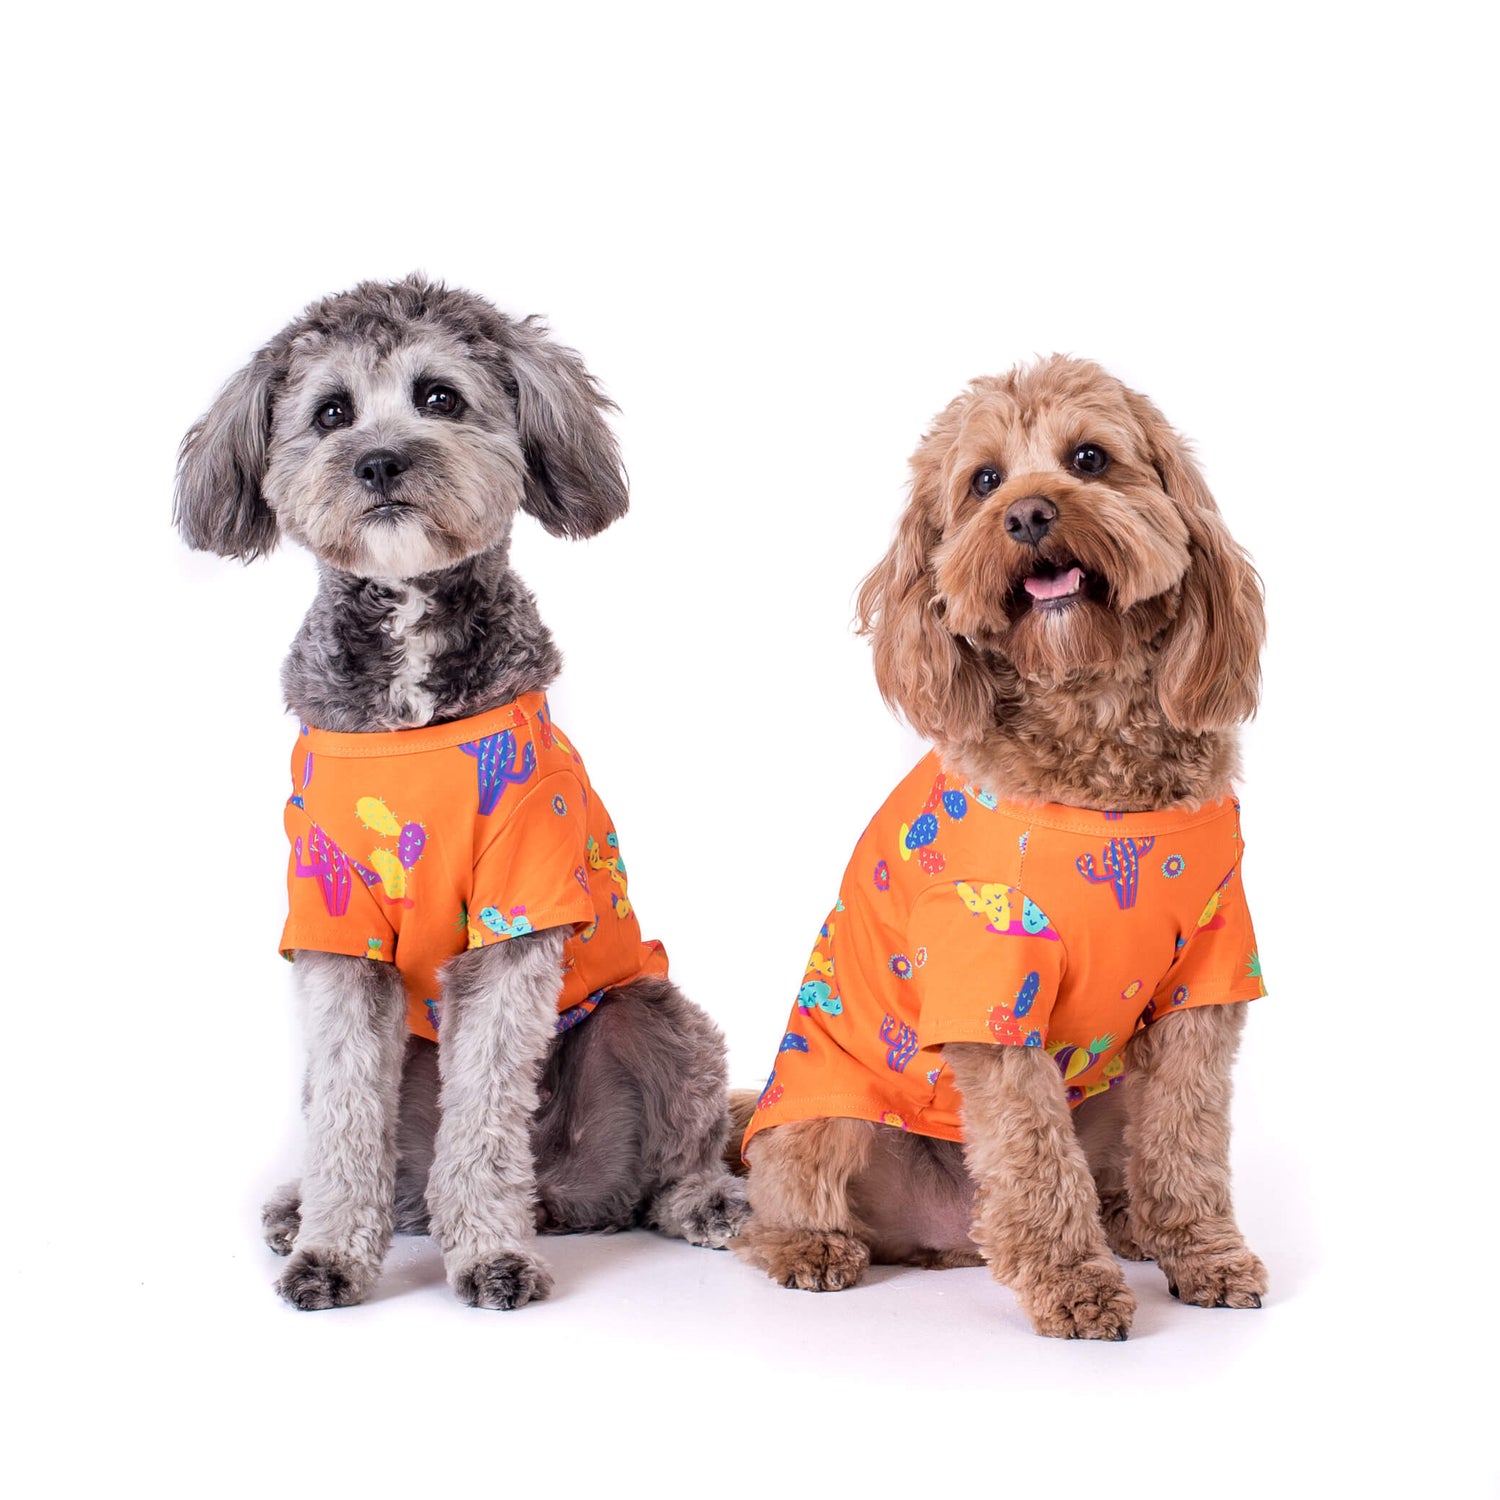 Two Cavoodles wearing bright orange shirts with cactus printed on it in rainbow colours.